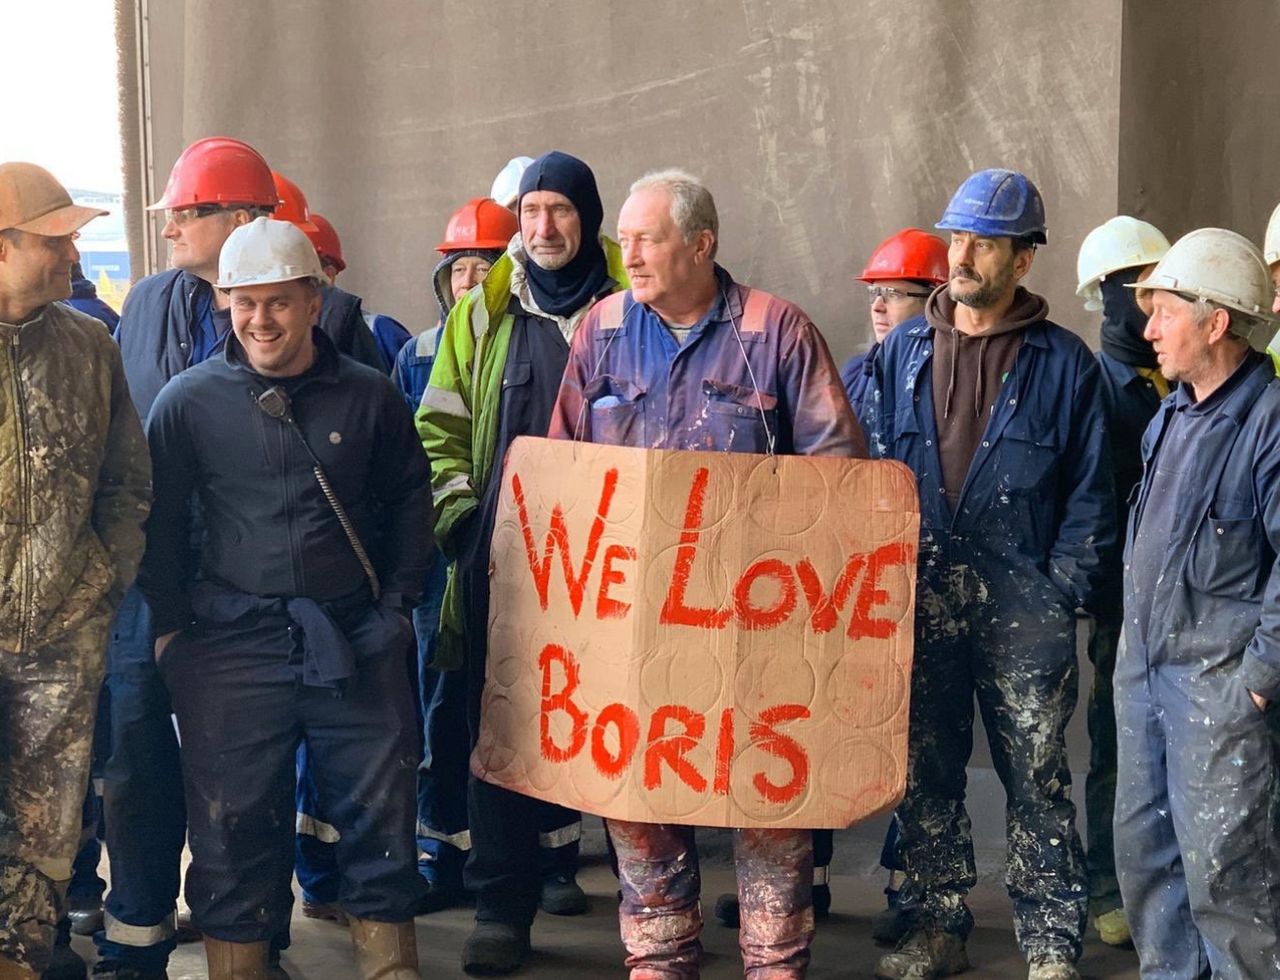 Teesside engineering workers during the 2019 election